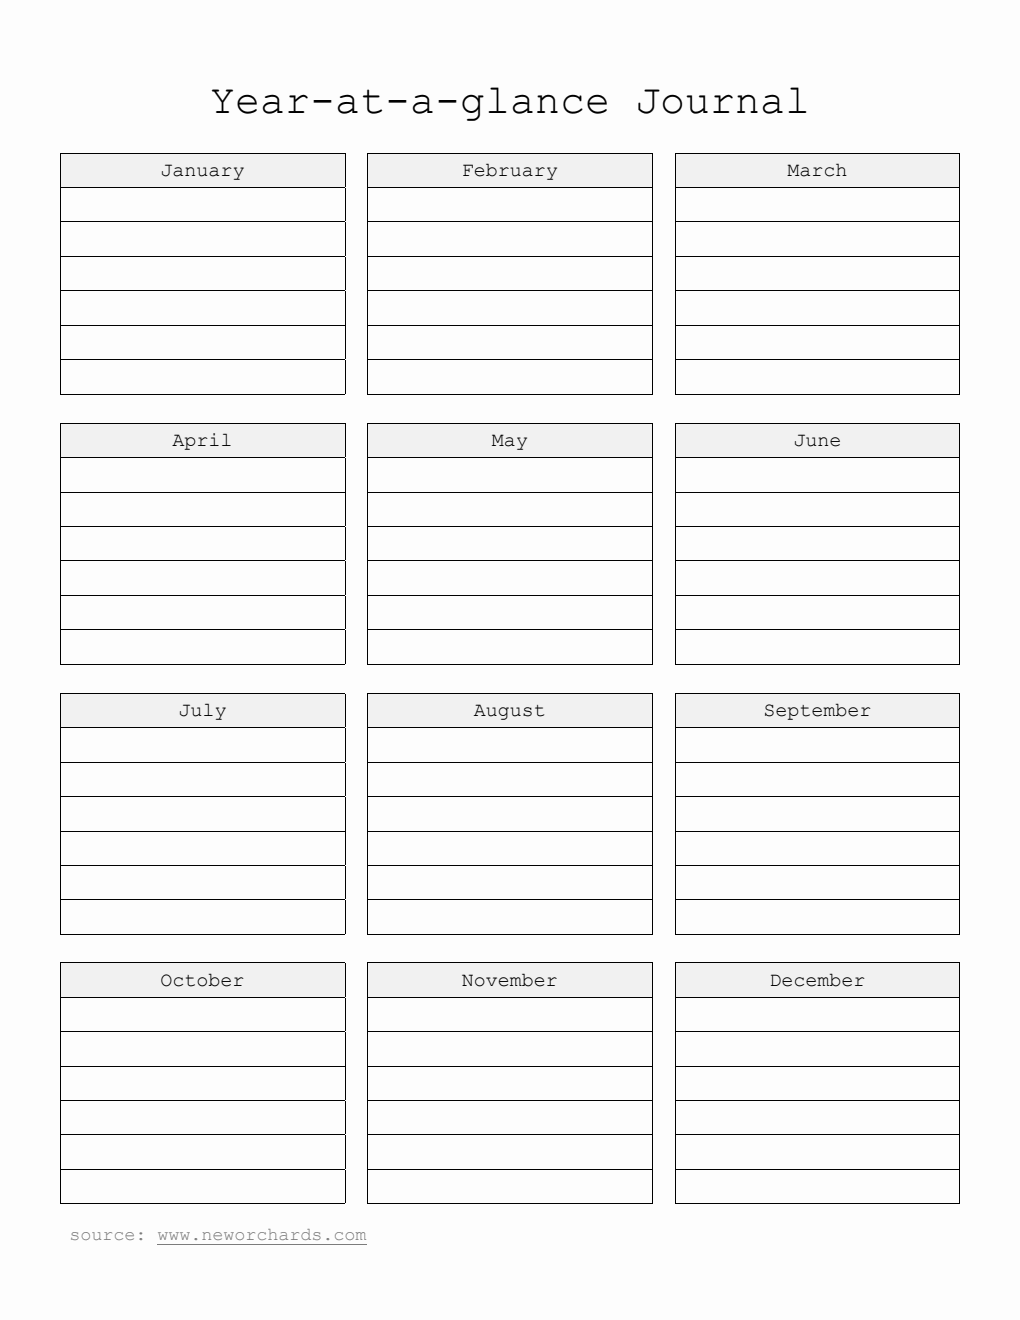 Simple Year at a Glance Template in Word